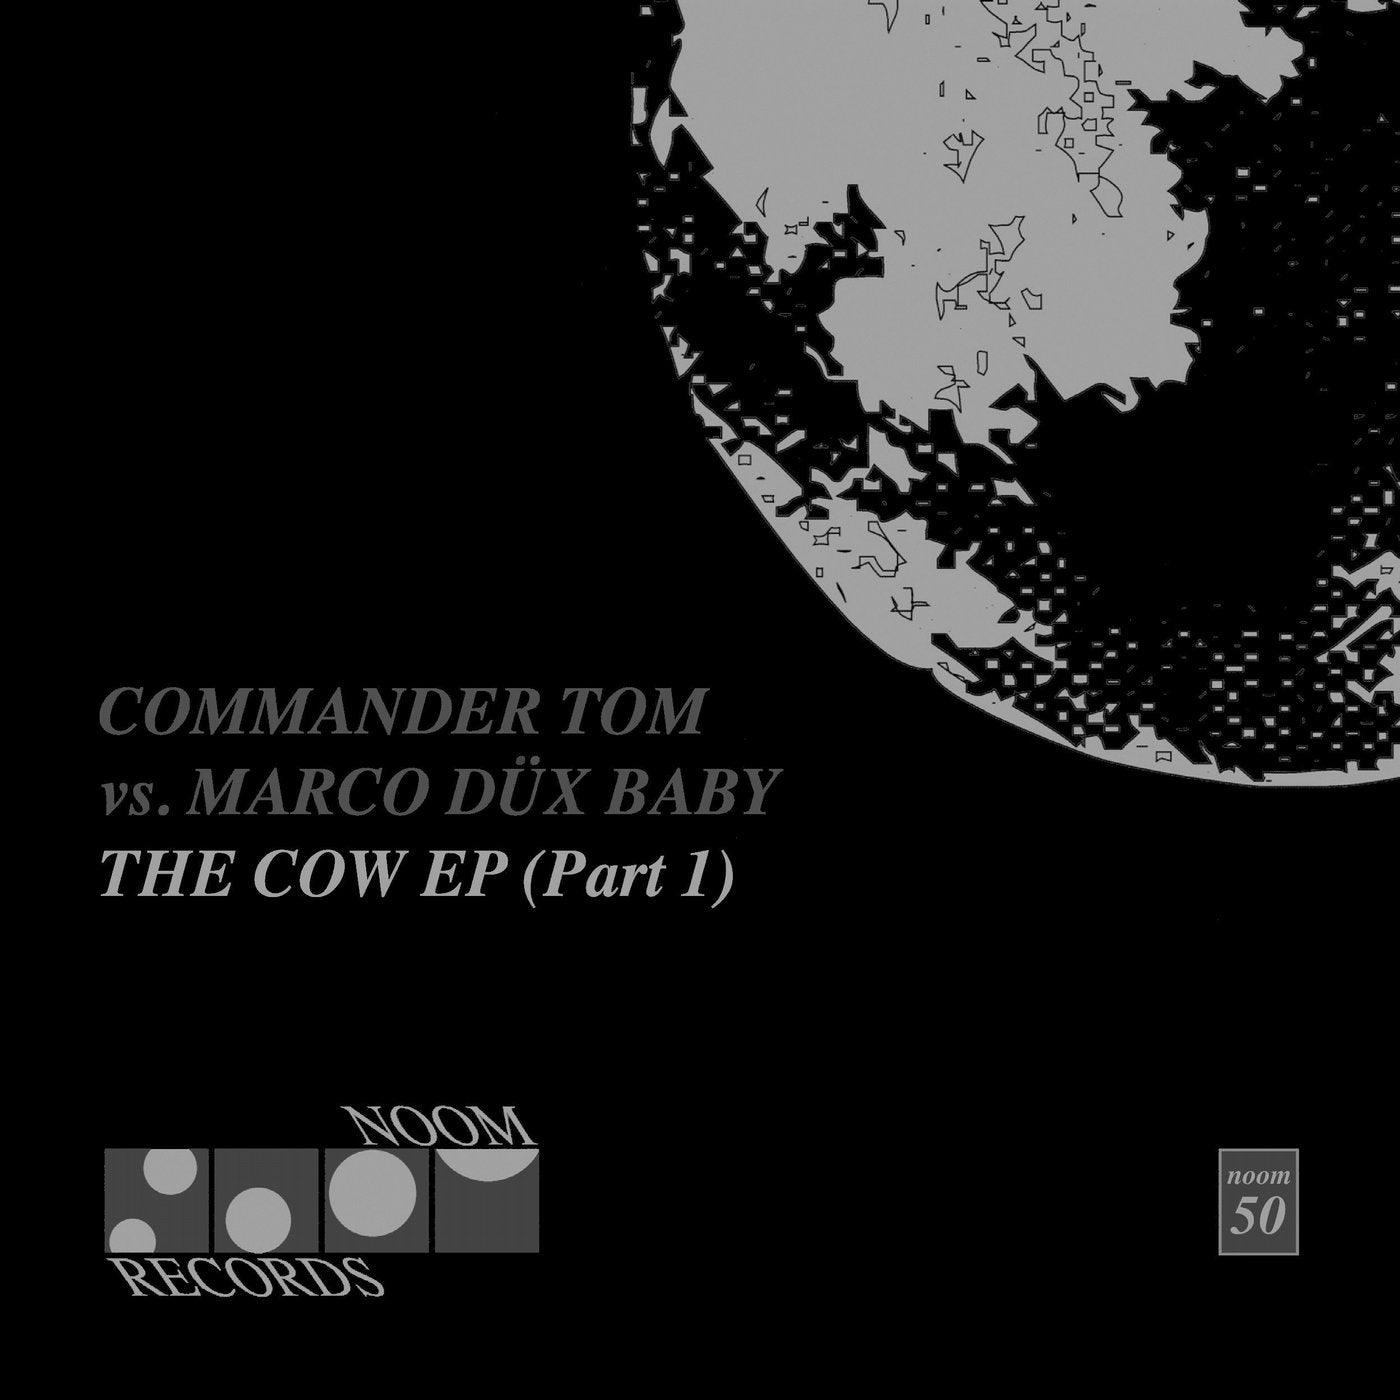 The Cow EP (Part 1)